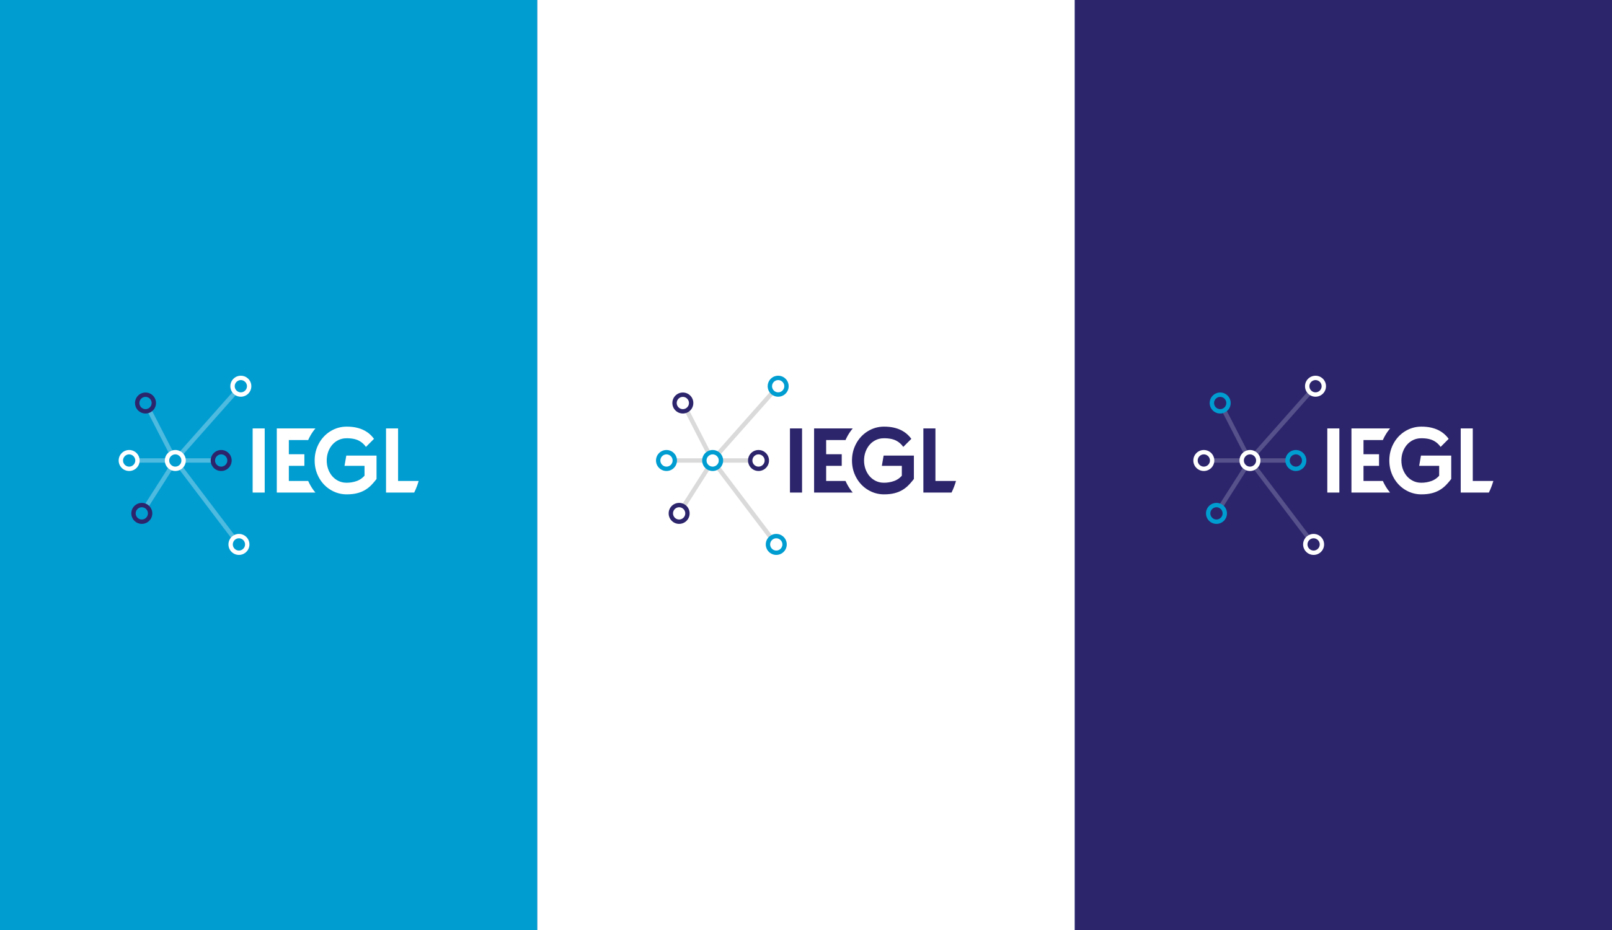 Logo versions for IEGL